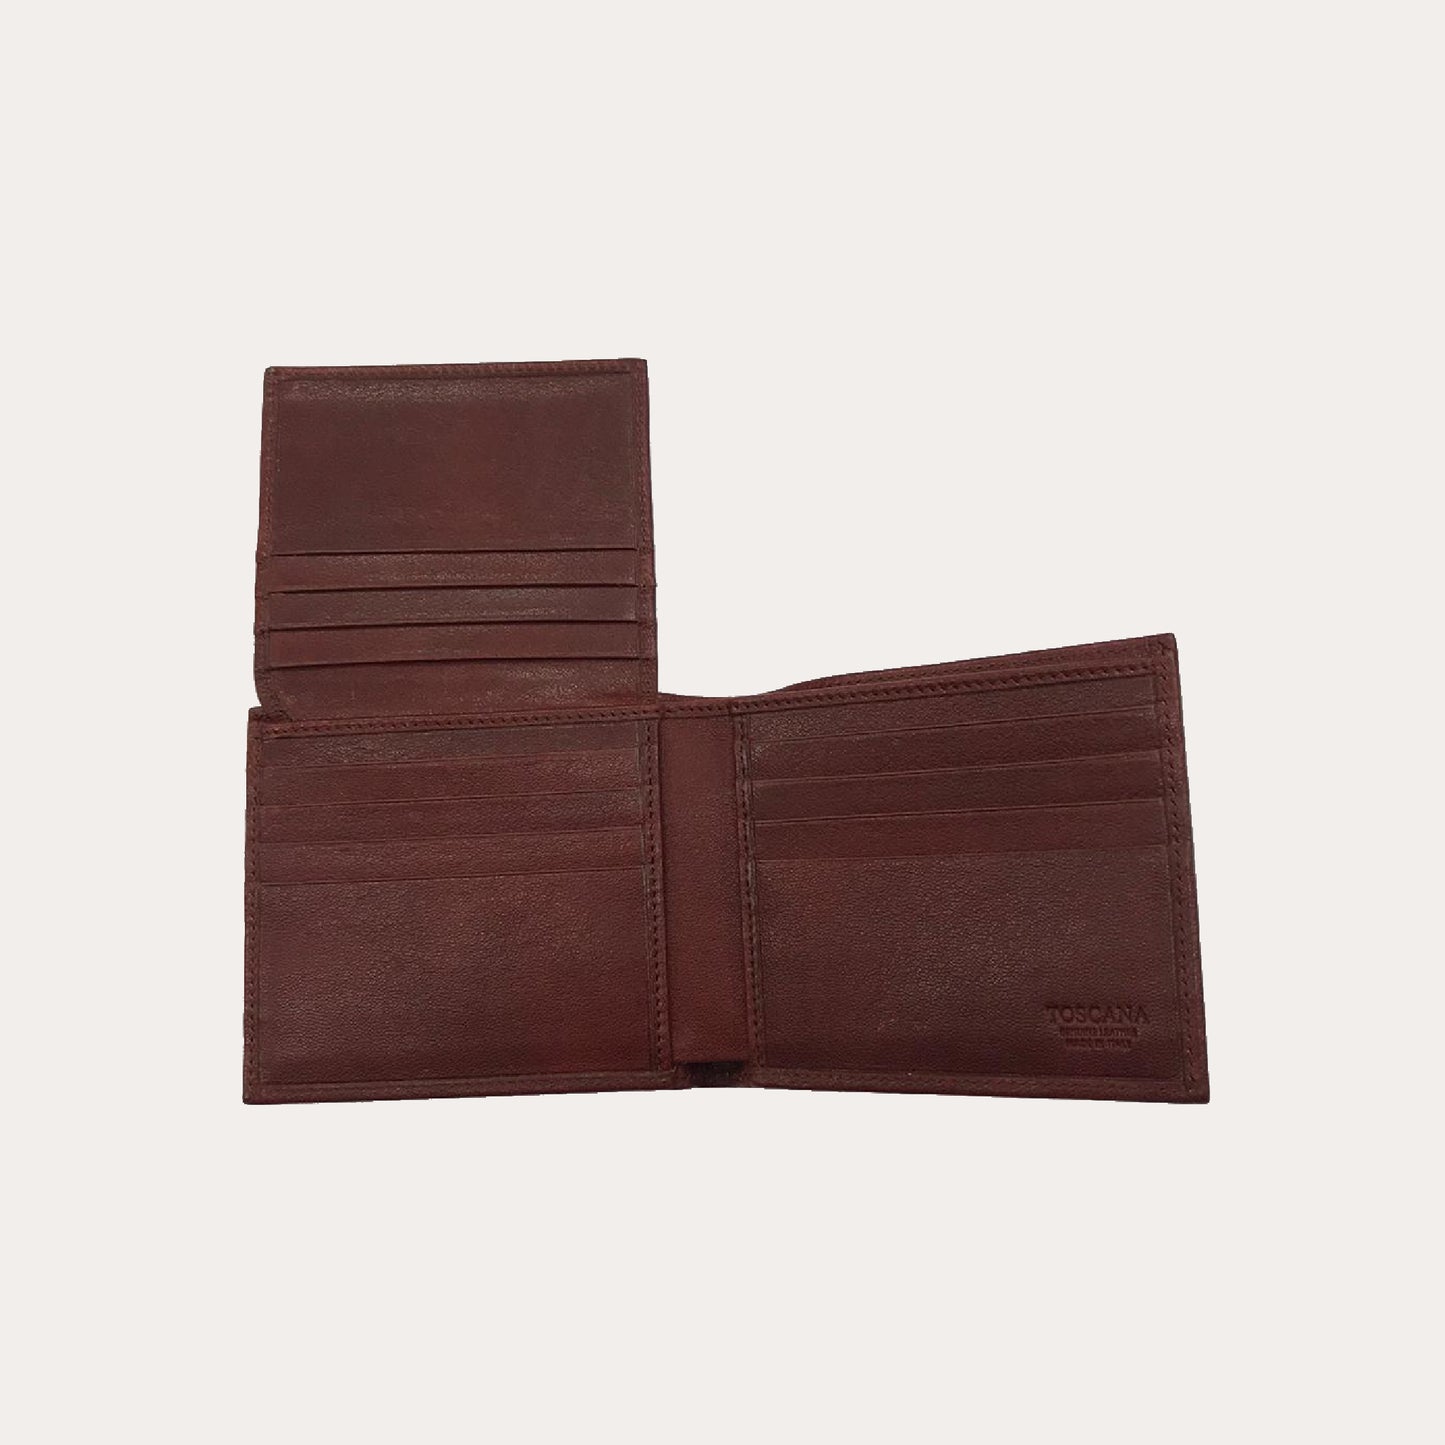 Maroon Vacchetta Leather Wallet-15 Credit Card Sections